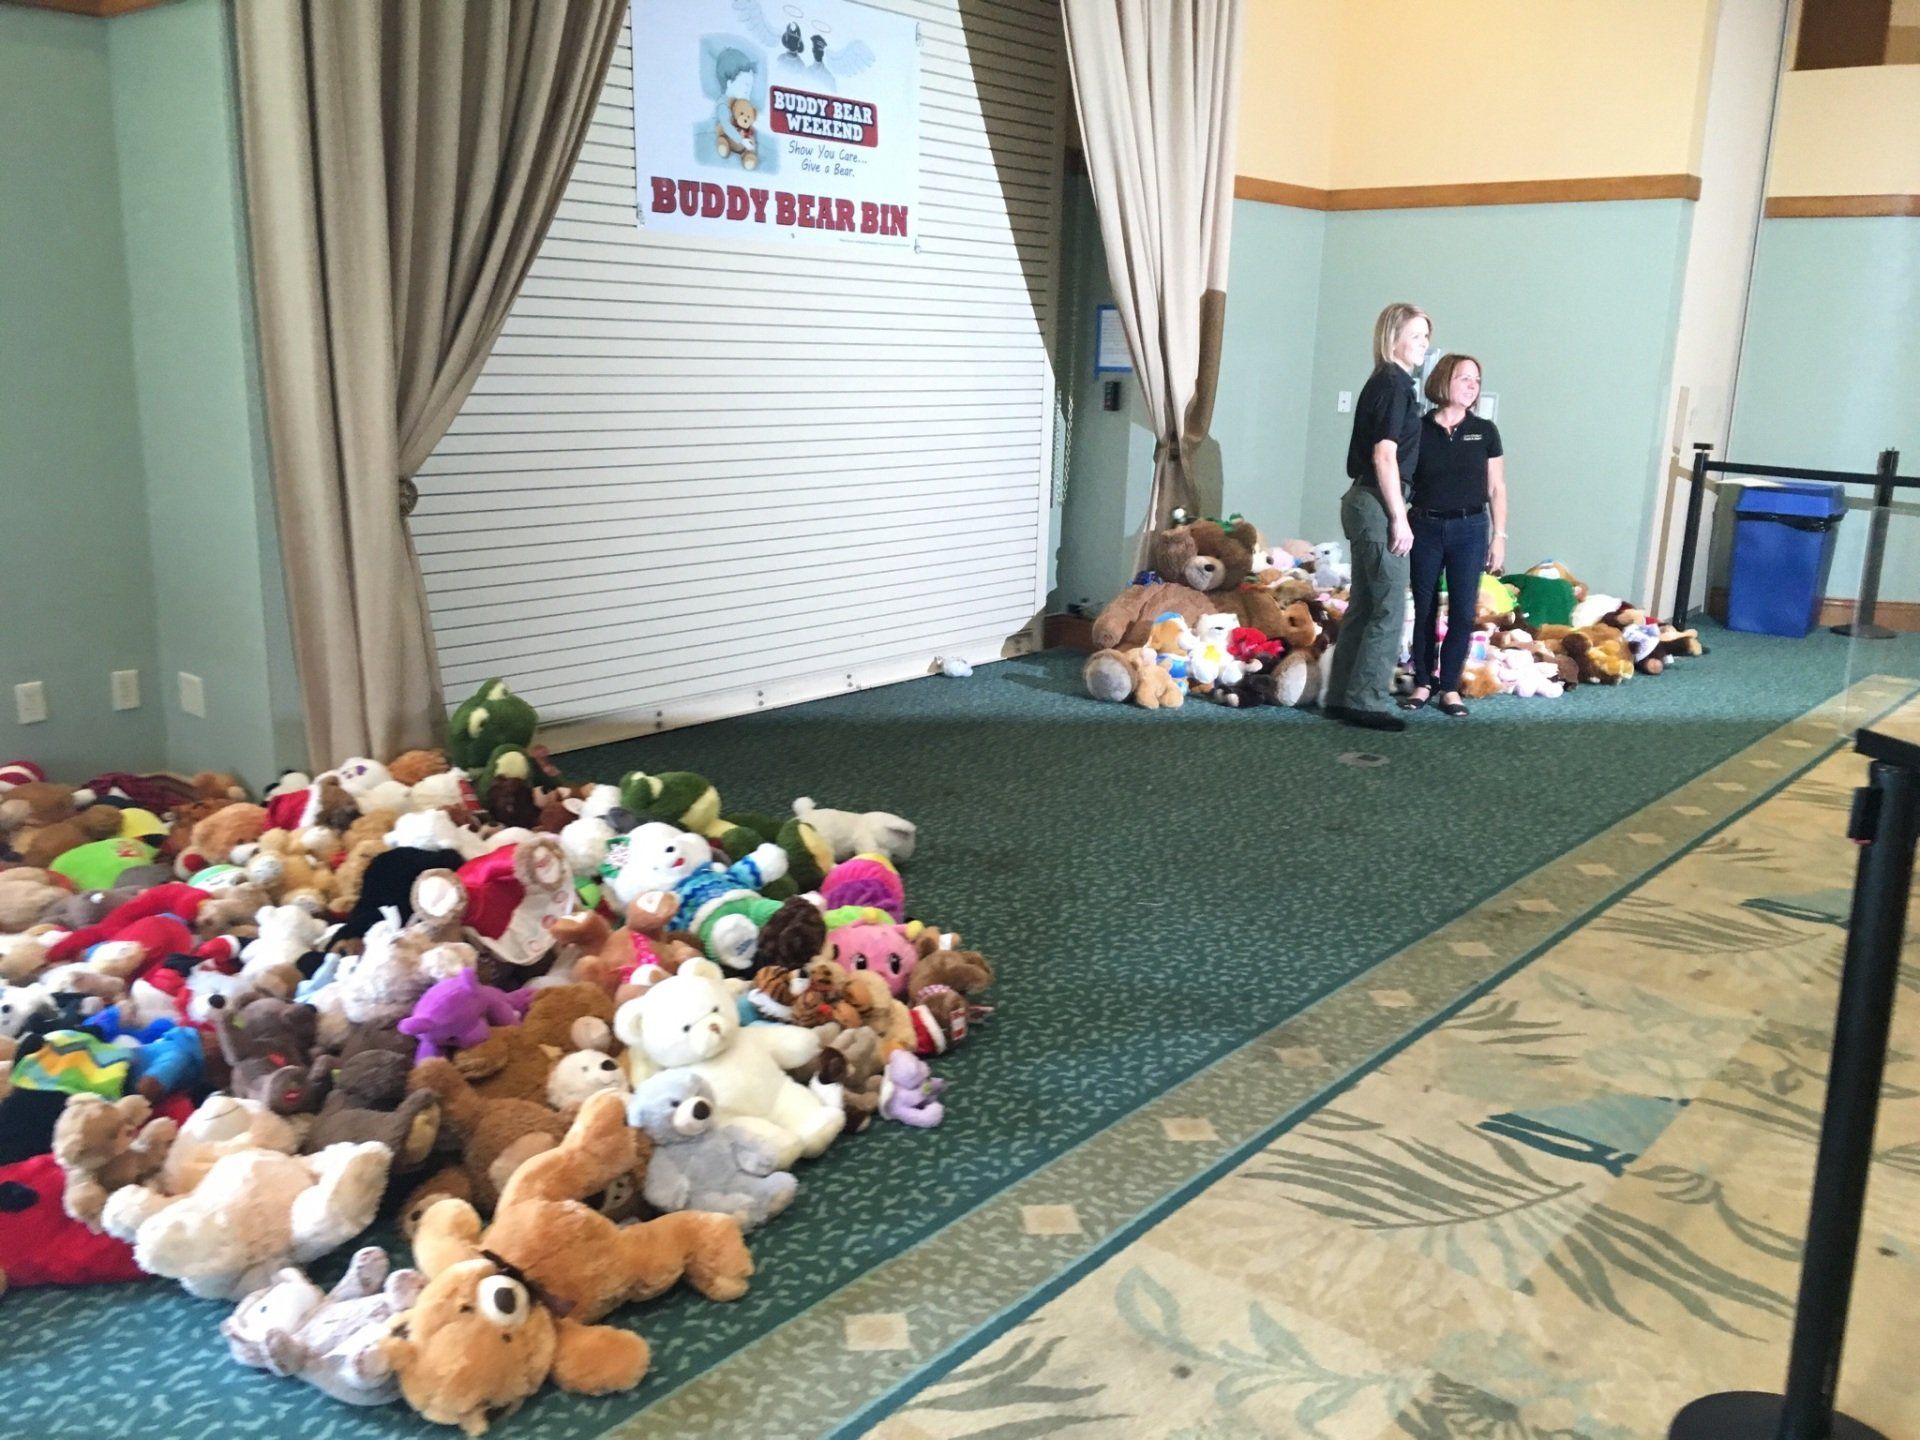 The first few hours of donating to the Buddy Bear® bin